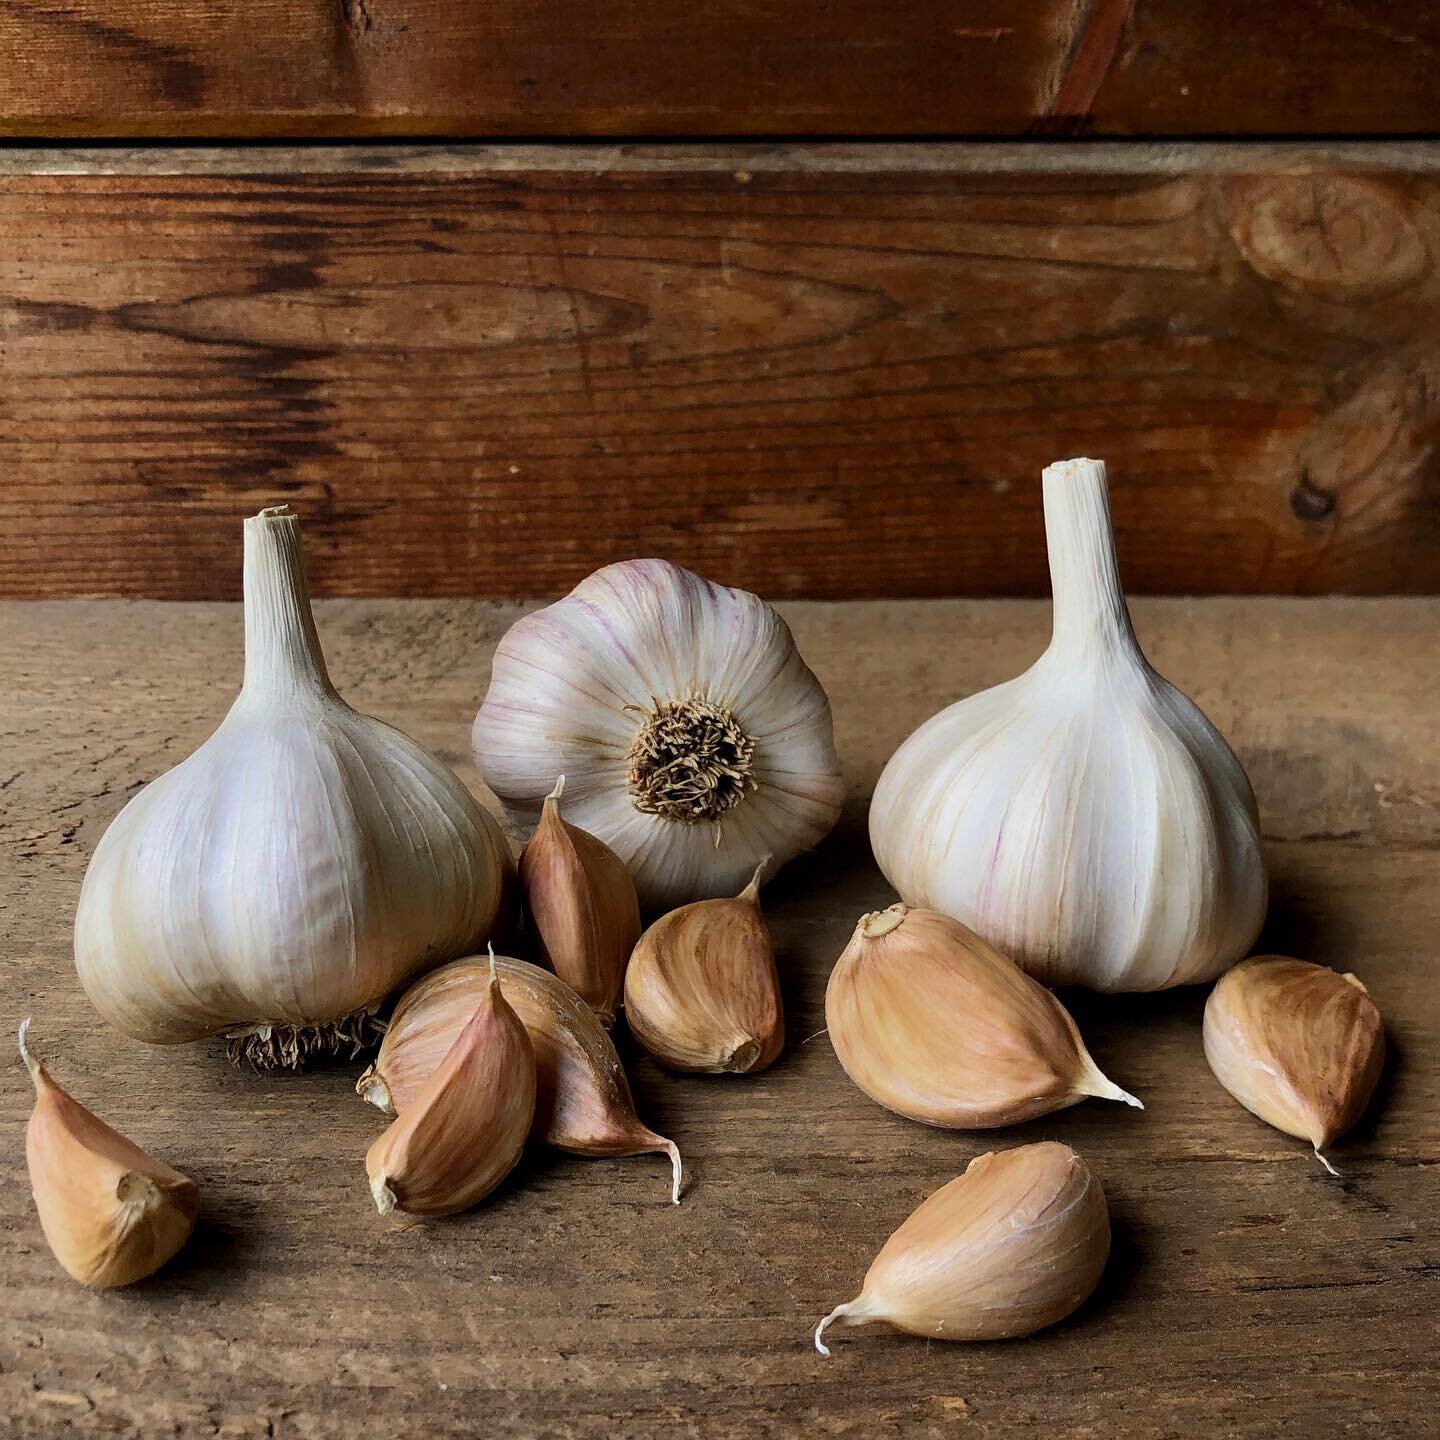 Our garlic is up for sale on our website now for all those looking to either eat or plant some delicious farm grown garlic 😉#garlic #garlicfarming #homegrown #delicious #cook #eat #plant #garden #gardening #farming